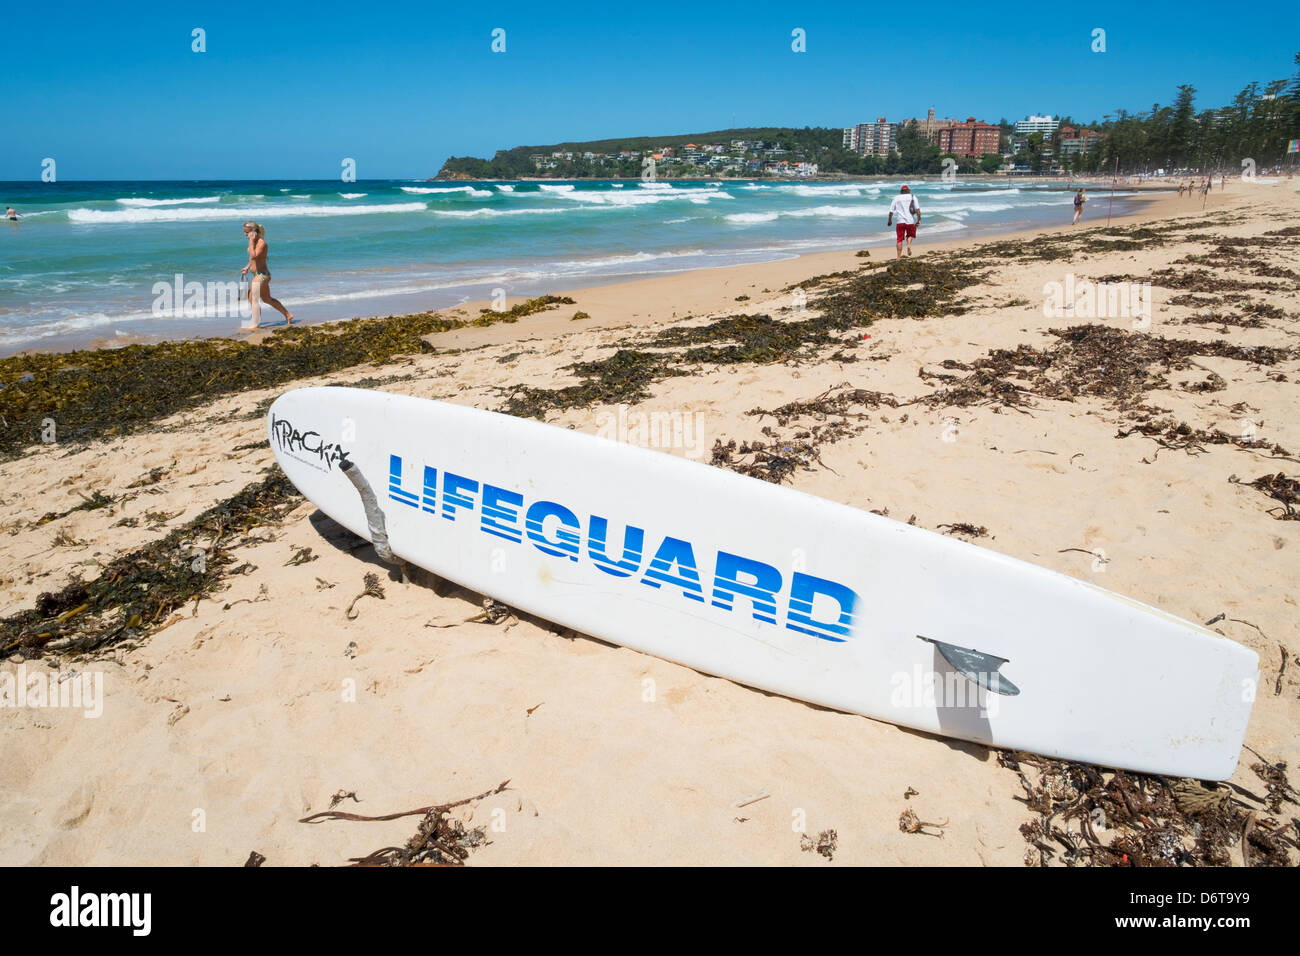 Lifeguard surfboard on Manly Beach in Australia Stock Photo